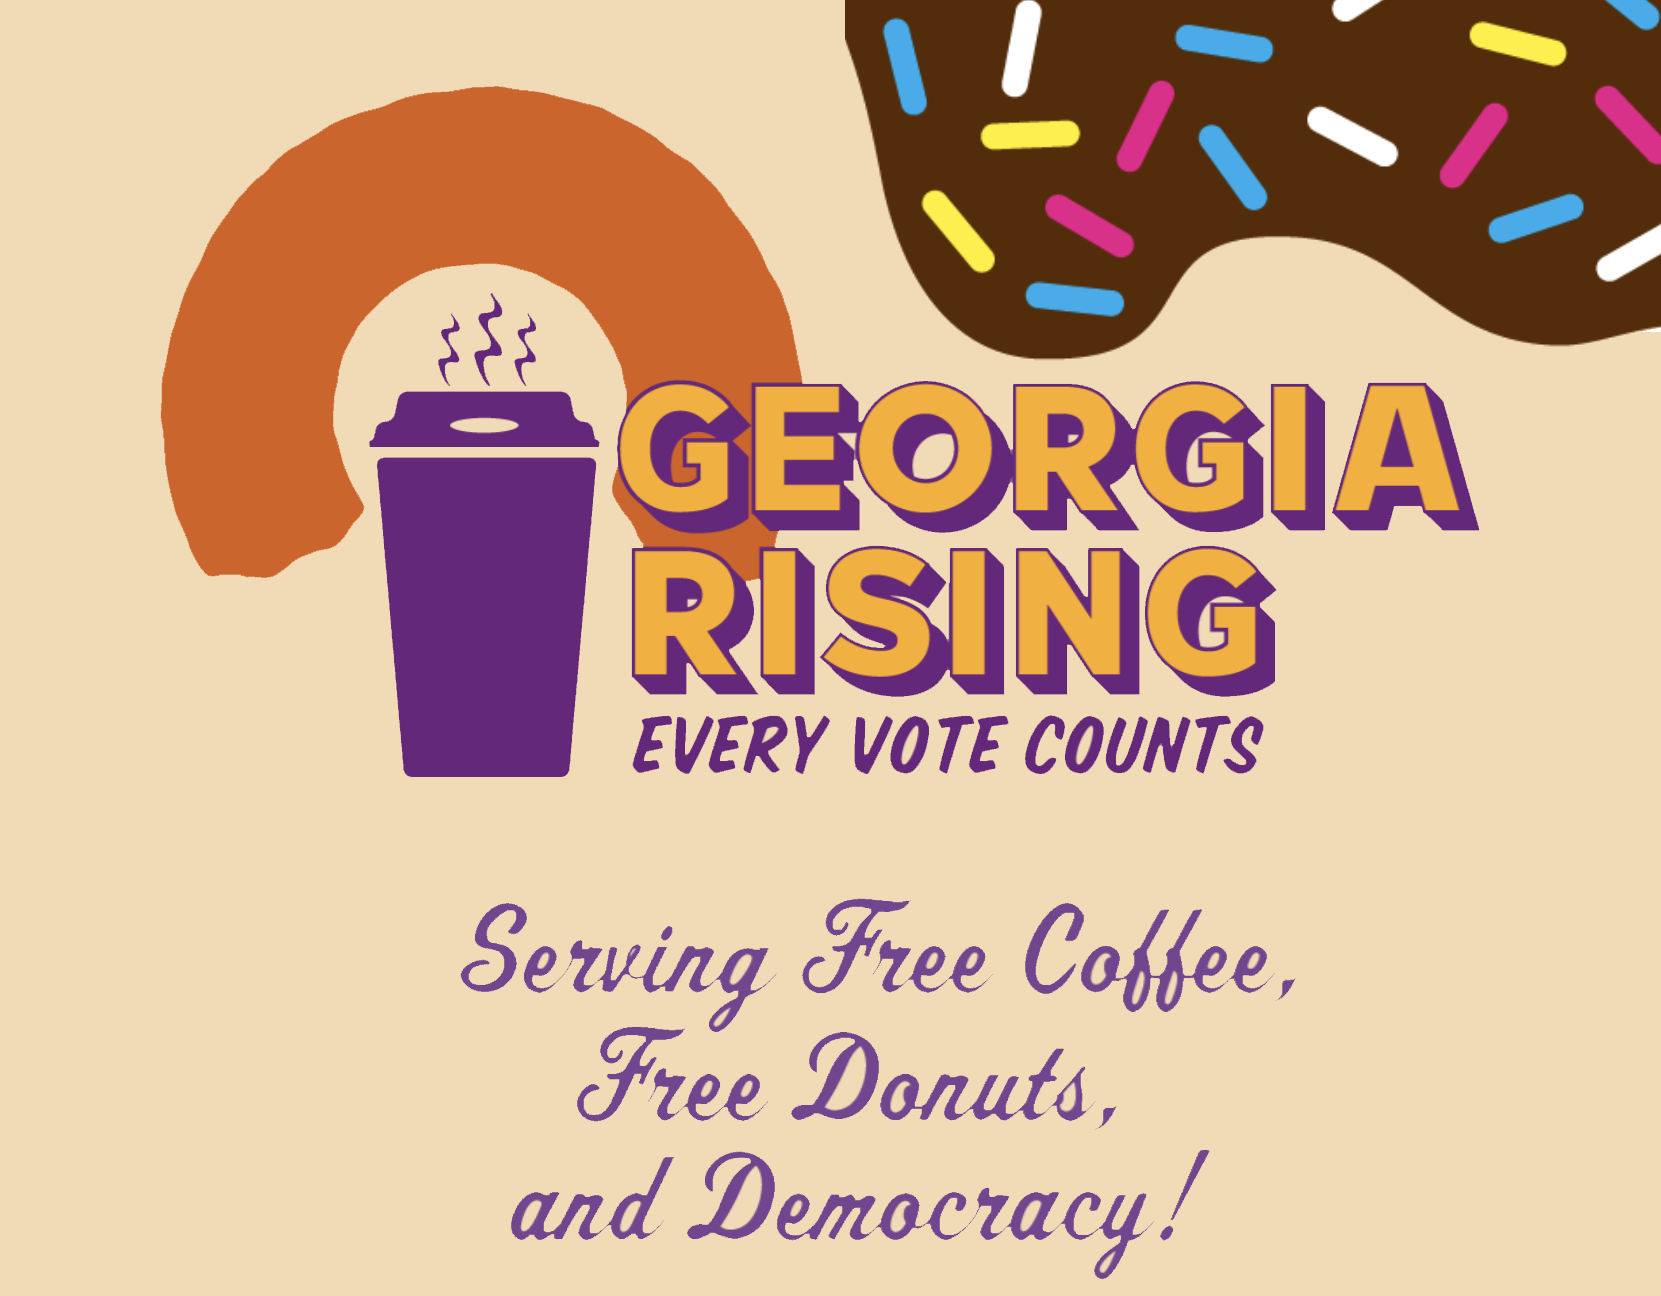 Branding for Georgia Rising — Every Vote Counts